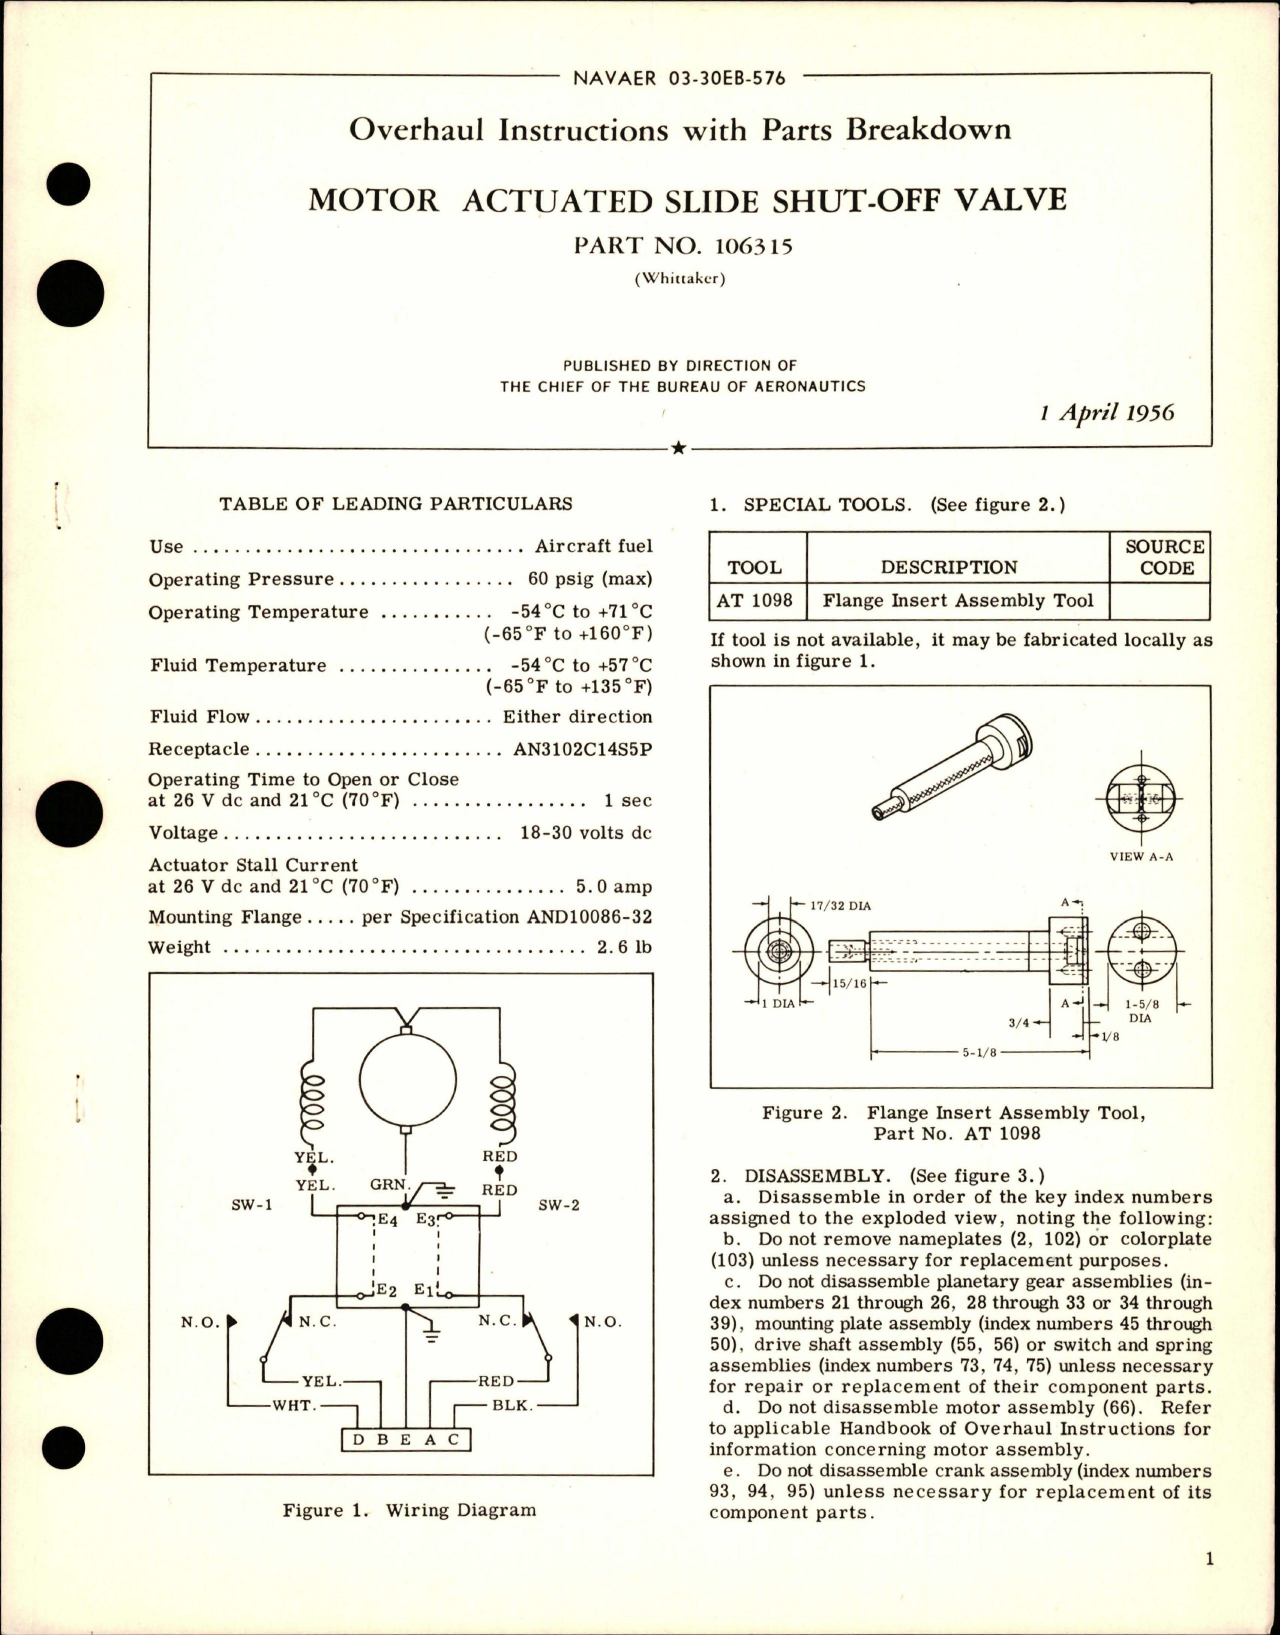 Sample page 1 from AirCorps Library document: Overhaul Instructions with Parts for Motor Actuated Slide Shut Off Valve - Part 106315